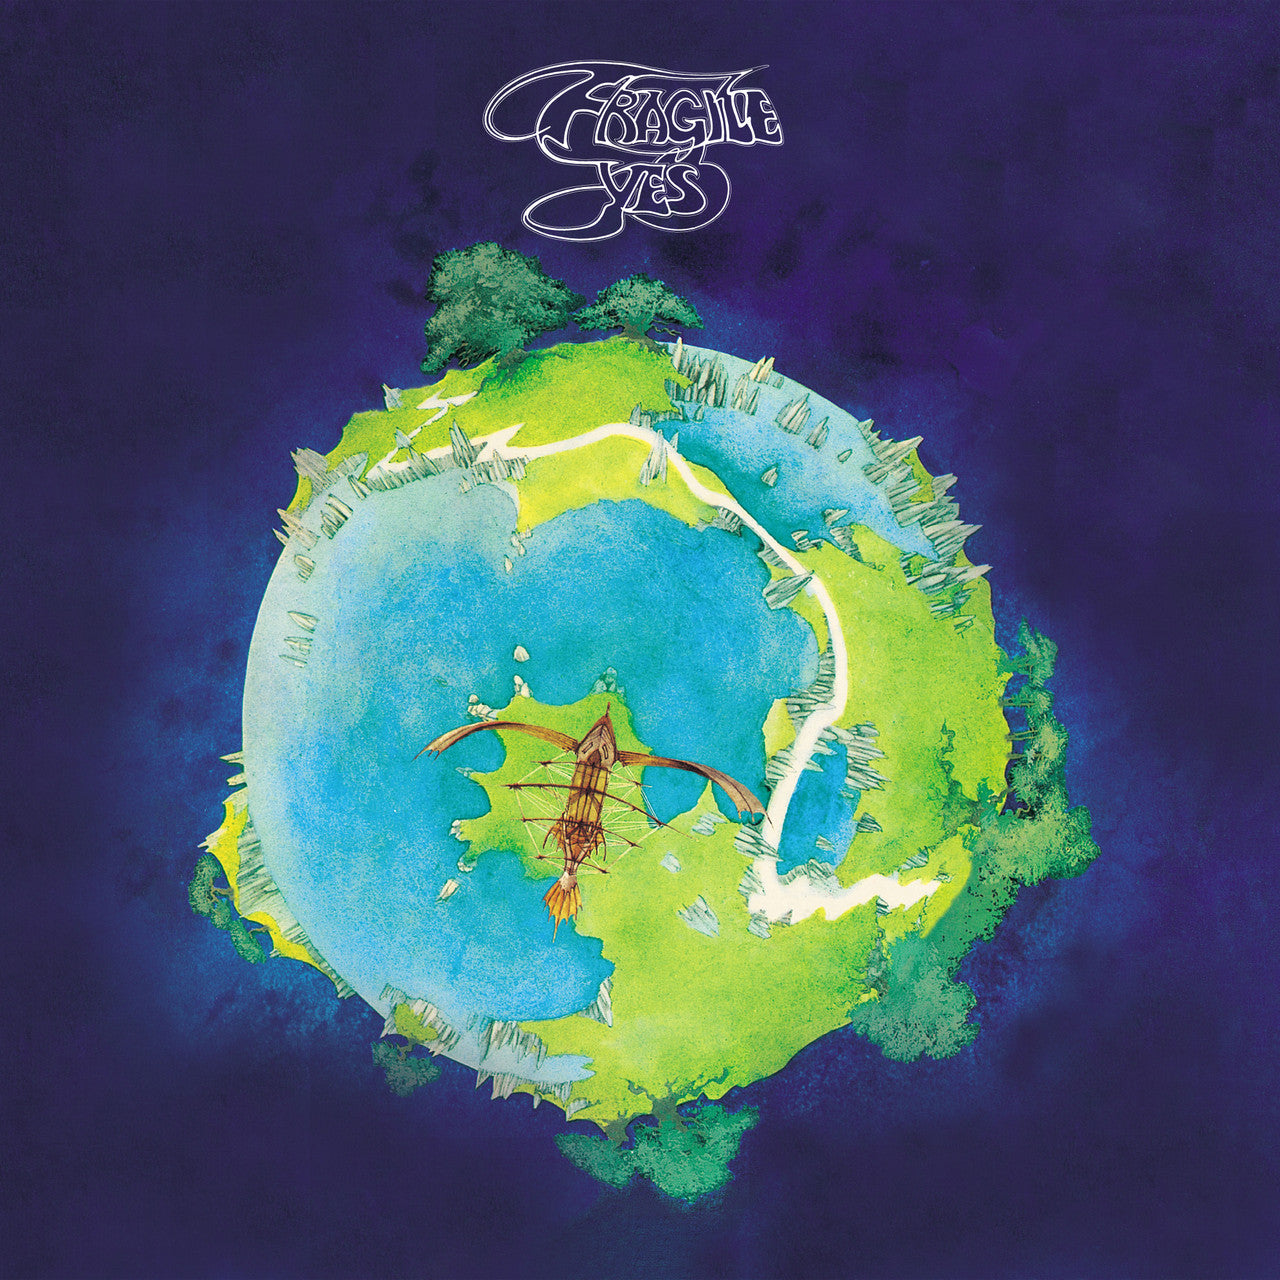 (Pre Order) Yes - Fragile (Super Deluxe Edition) - LP, 4x CD & Blu-Ray Audio Disc Box Set